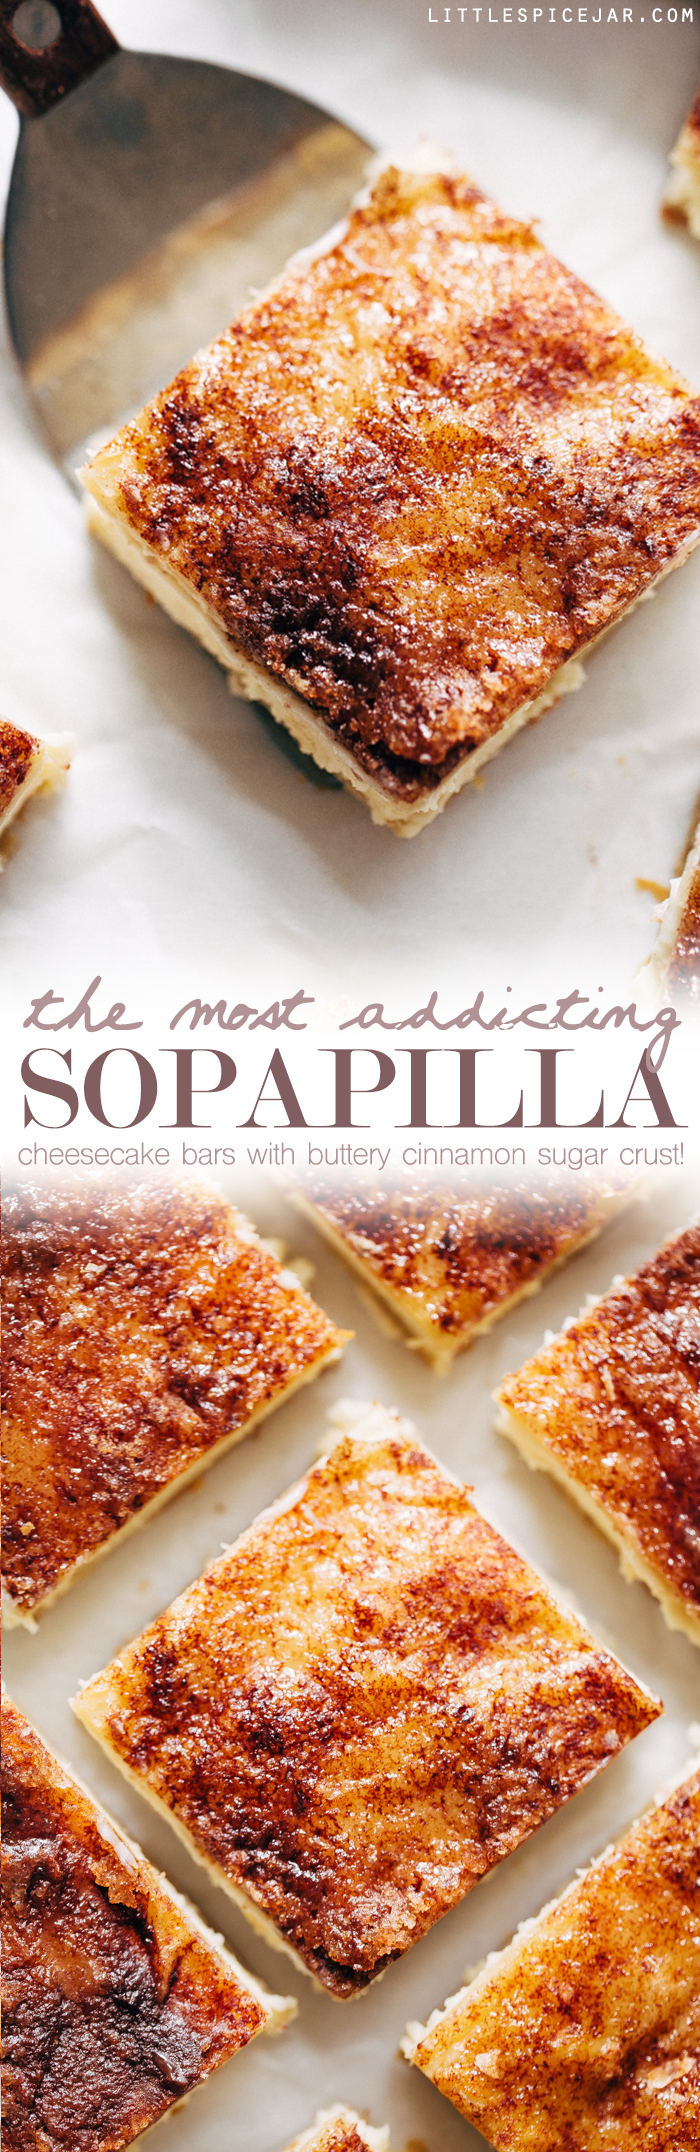 The Most Addicting Sopapilla Cheesecake Bars made with just 8 simple ingredients! These bars don't use the crescent roll dough! #sopapillacheesecakebars #cheesecake #cheesecakebars #snickerdoodle | Littlespicejar.com 